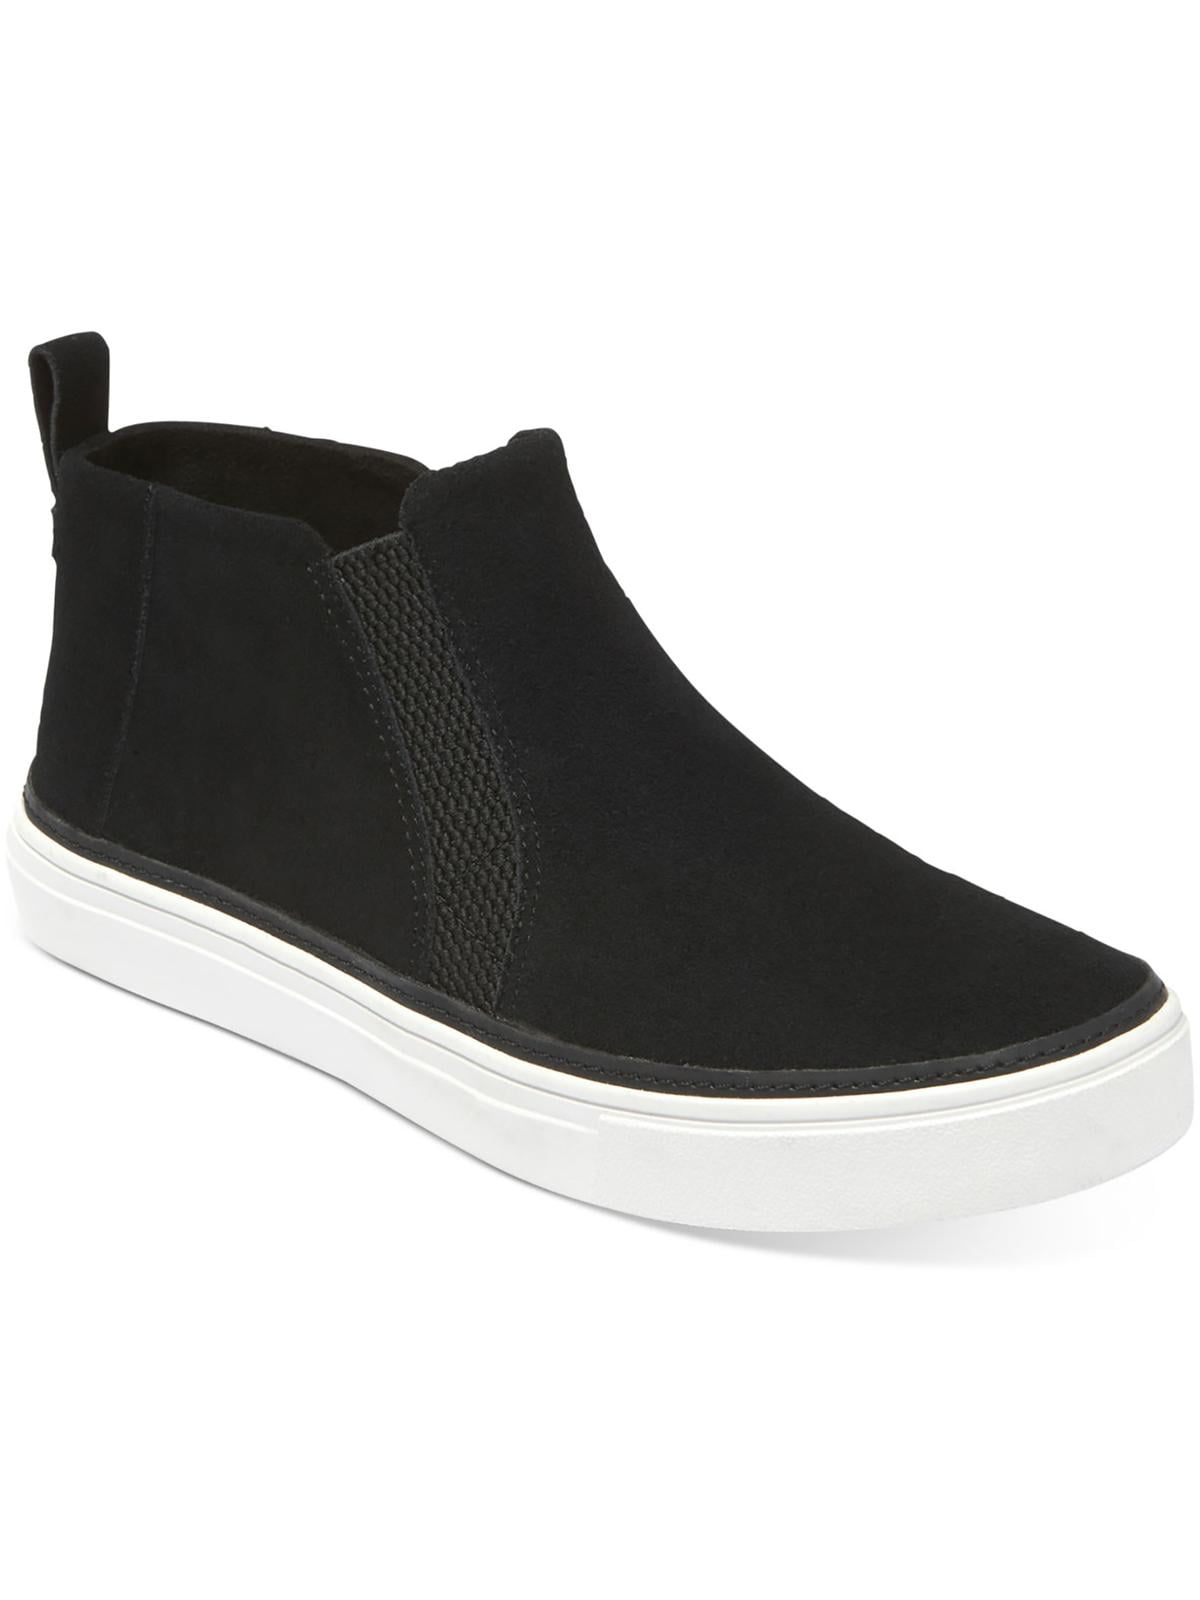 Toms Bryce Black Leather Suede Pull On Rounded Toe Low Top Fashion ...